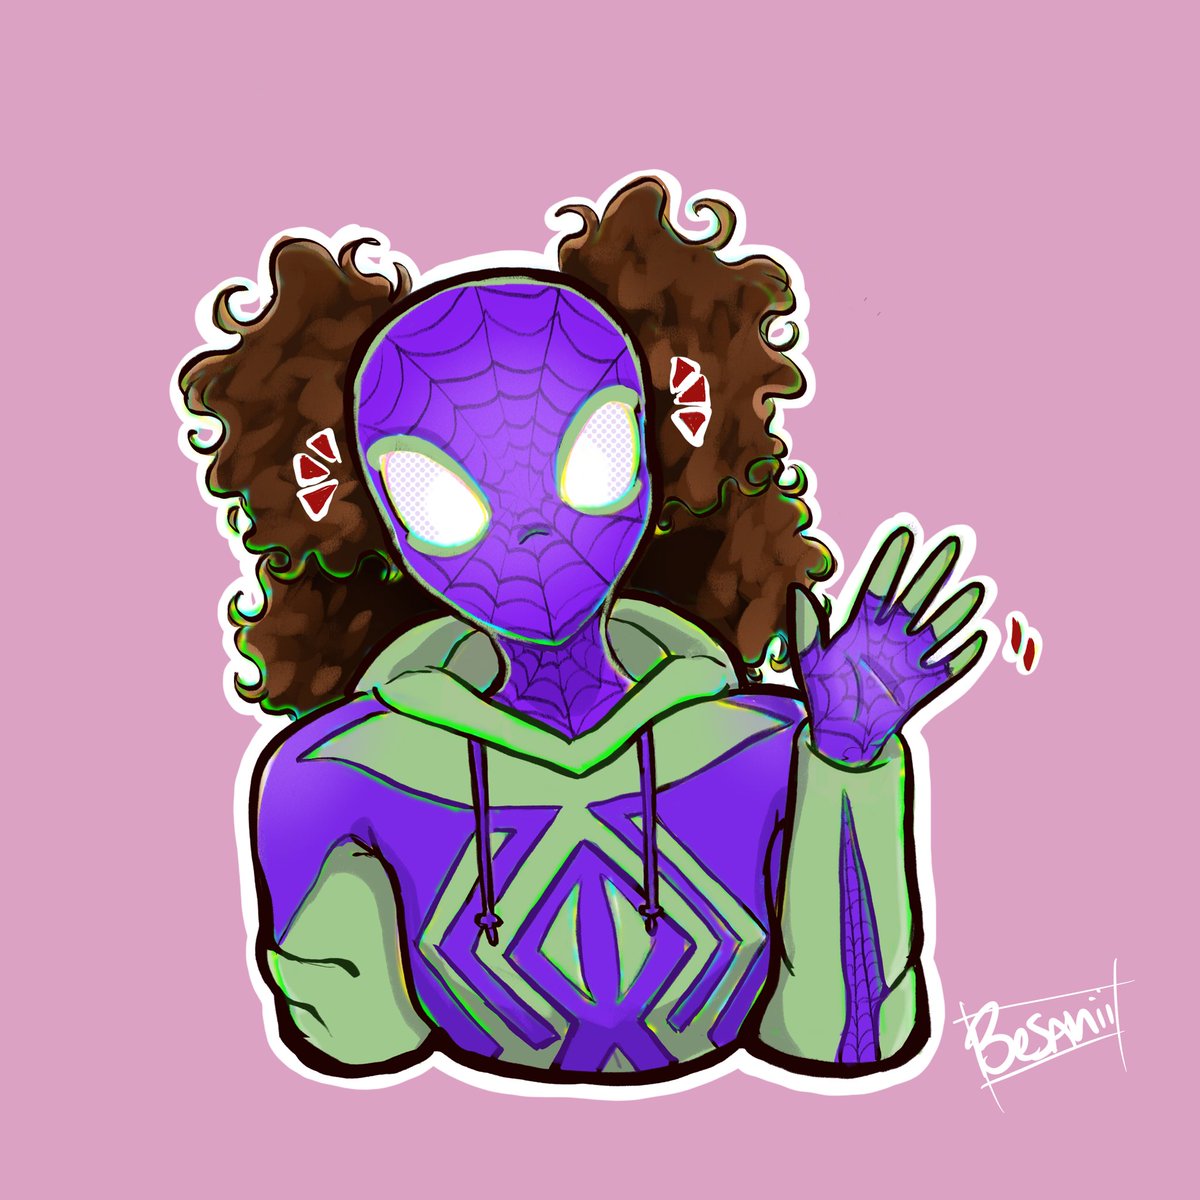 I’m Spidergirl. And I’m not the only one. Not by a long shot. 

THANK YOU @_besanii FOR THE ART!!